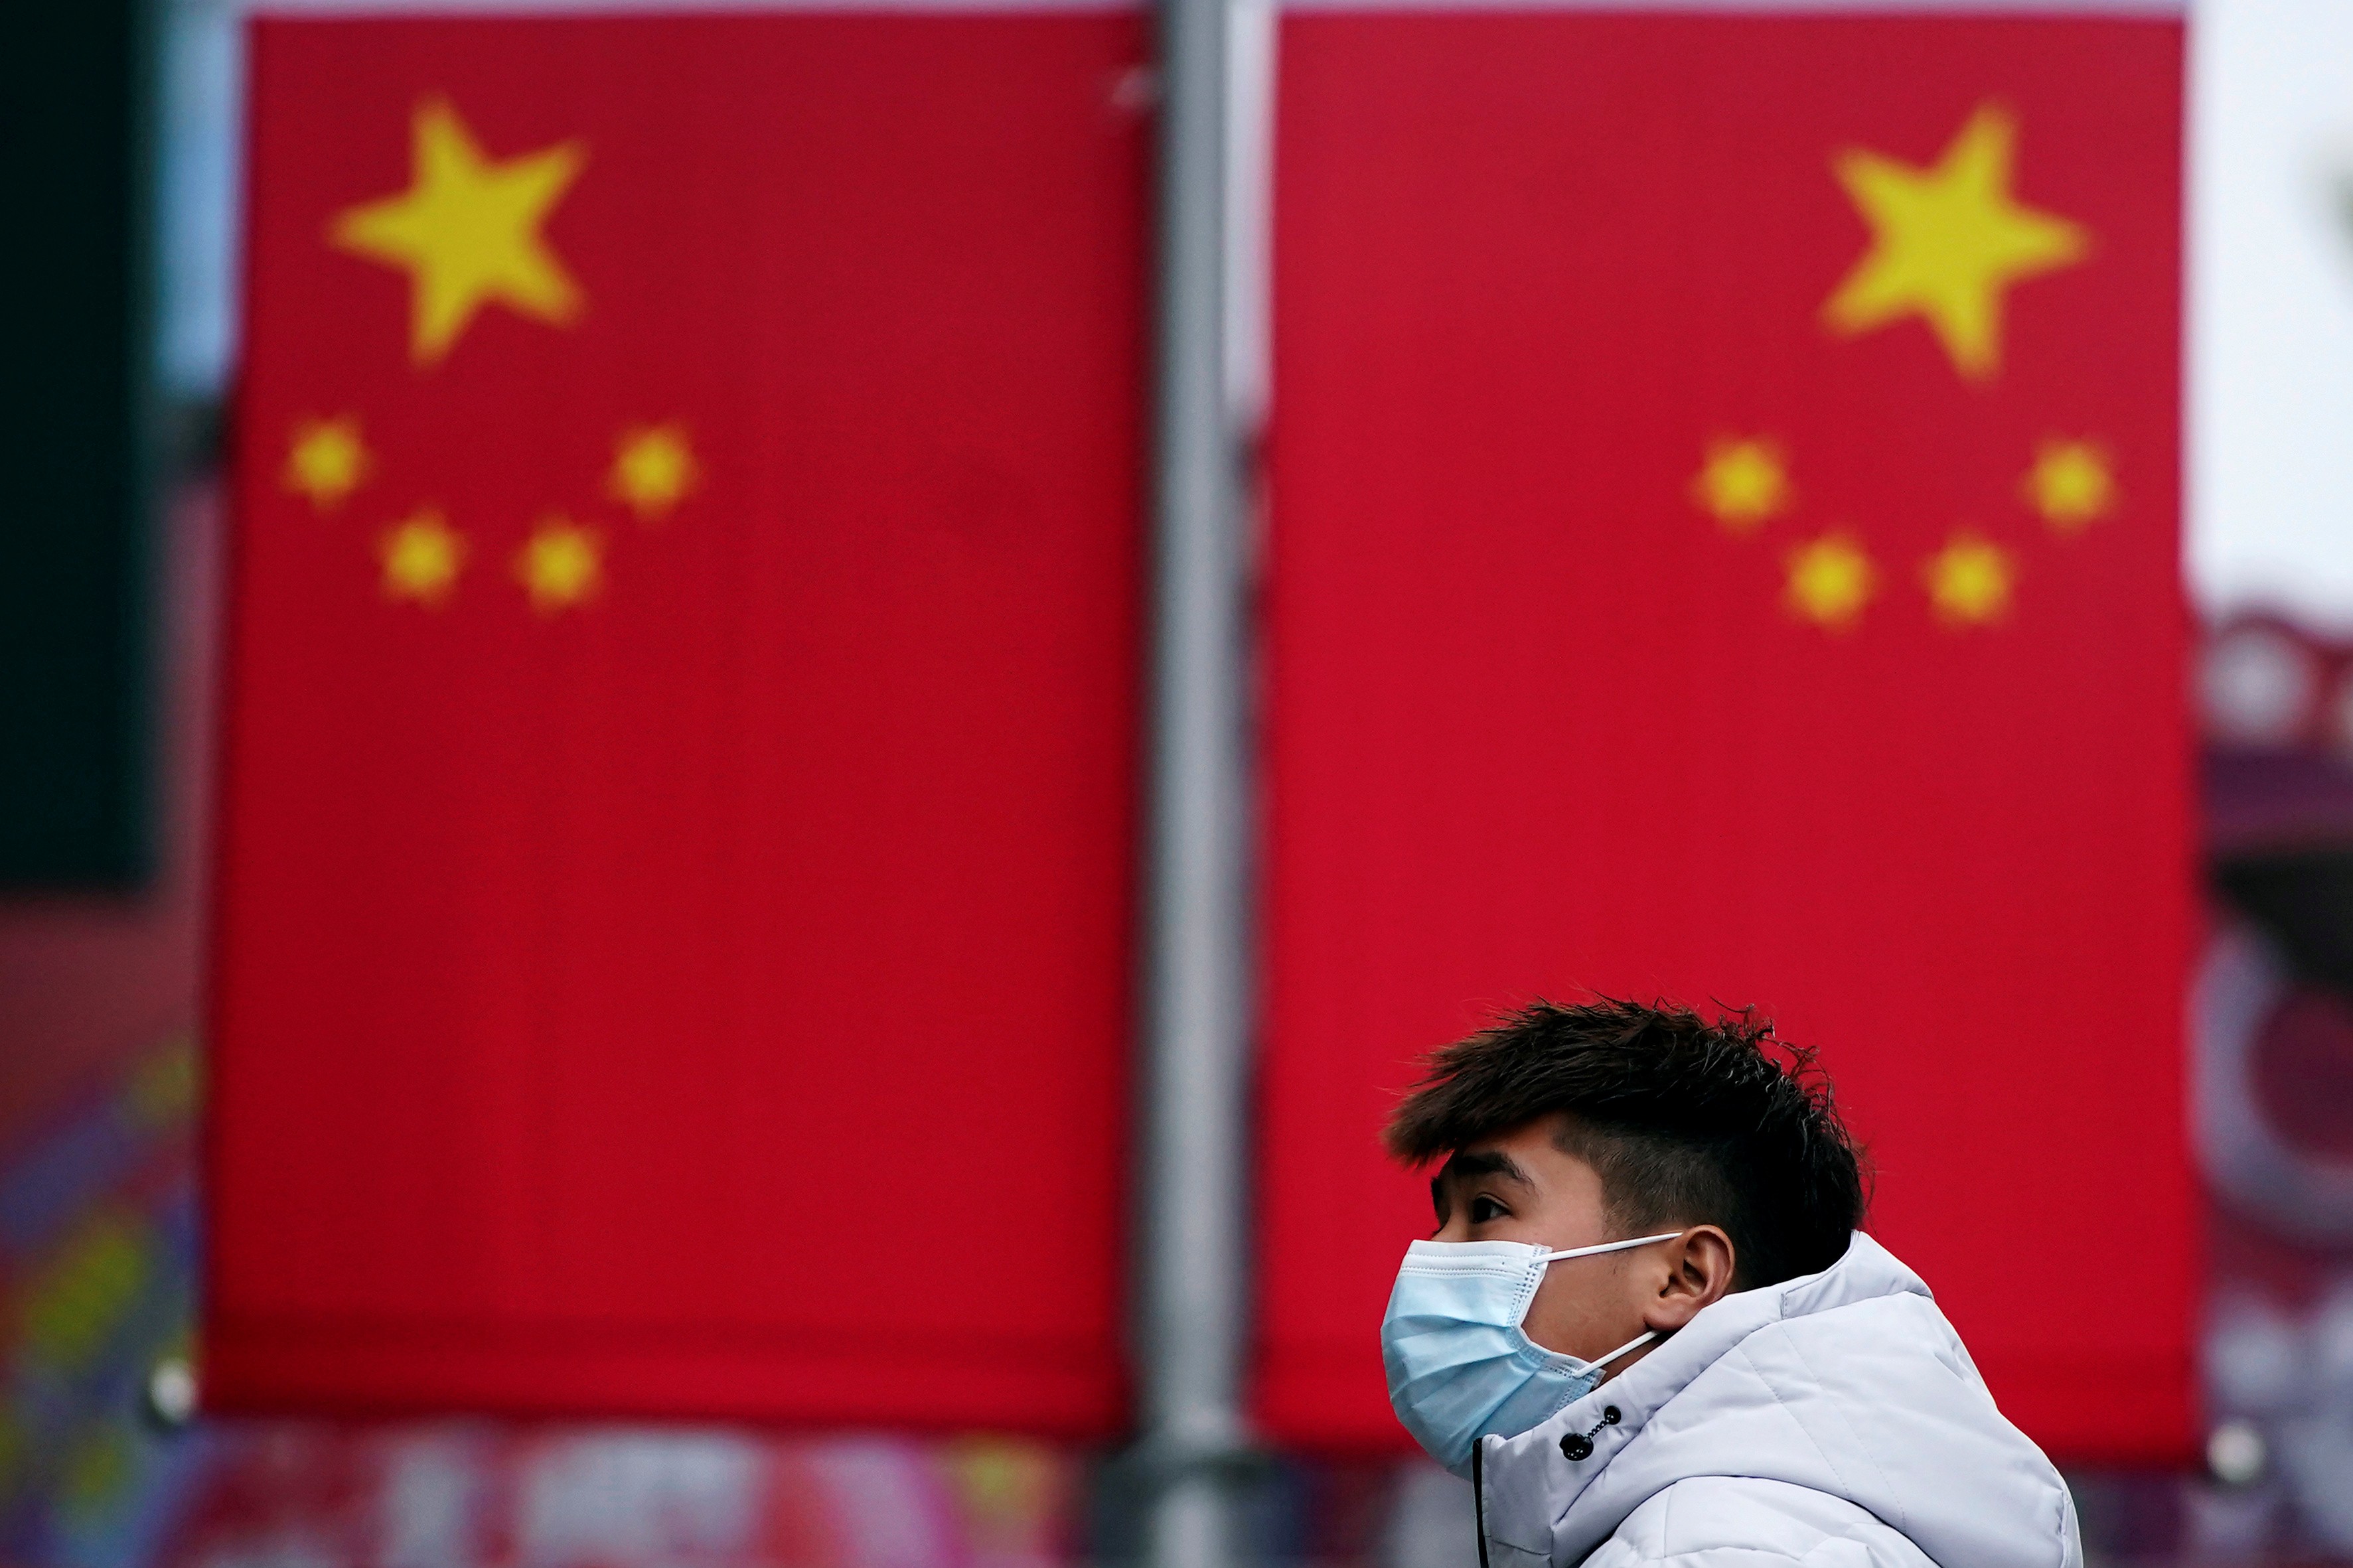 The outbreak that began in the city of Wuhan has spread across China and to other countries. Photo: Reuters